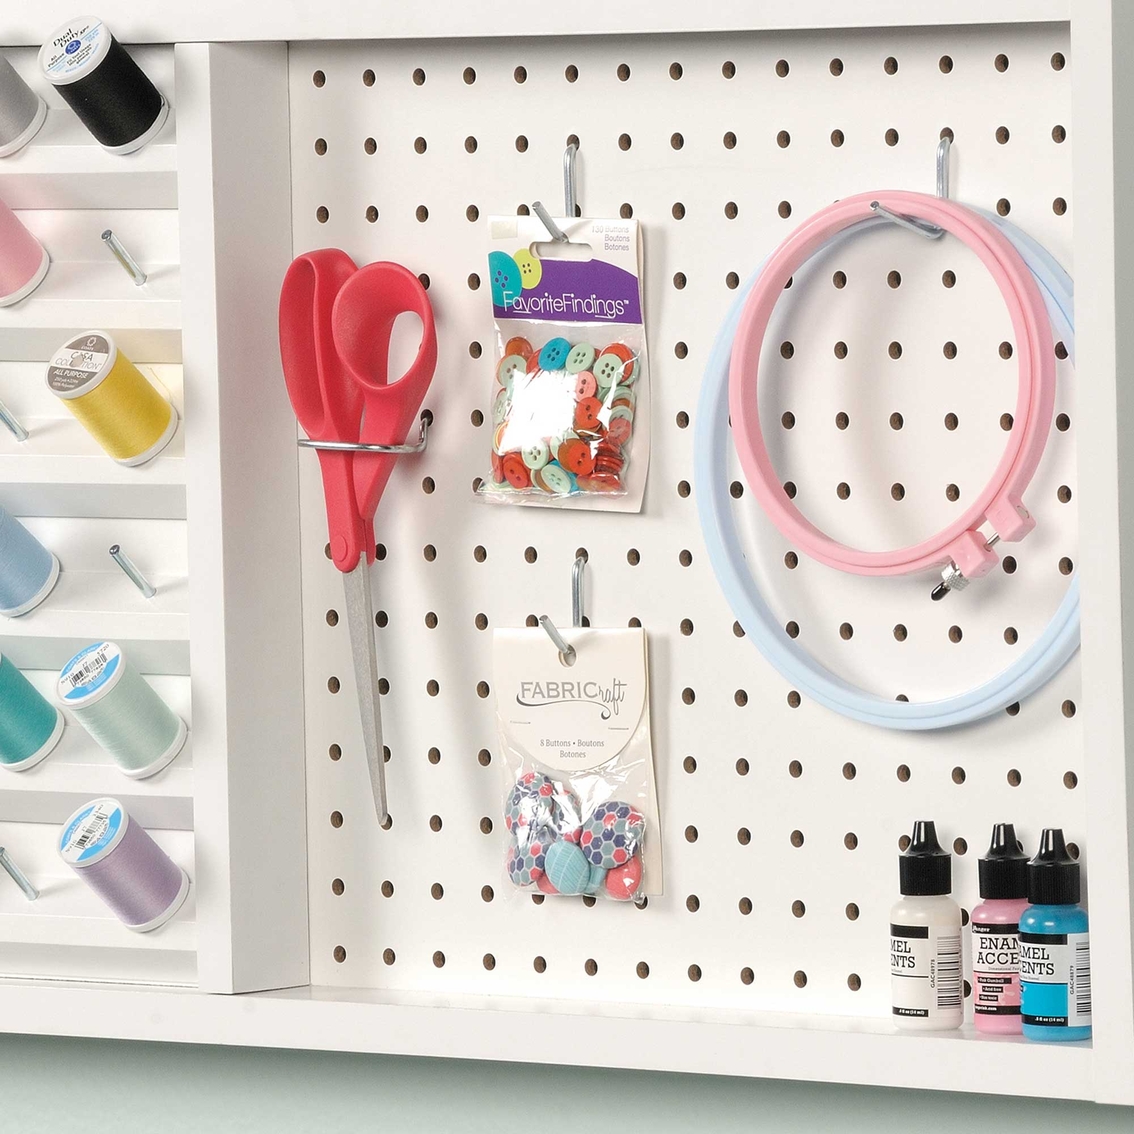 Sauder Wall Mounted Pegboard with Thread Storage - Image 2 of 3